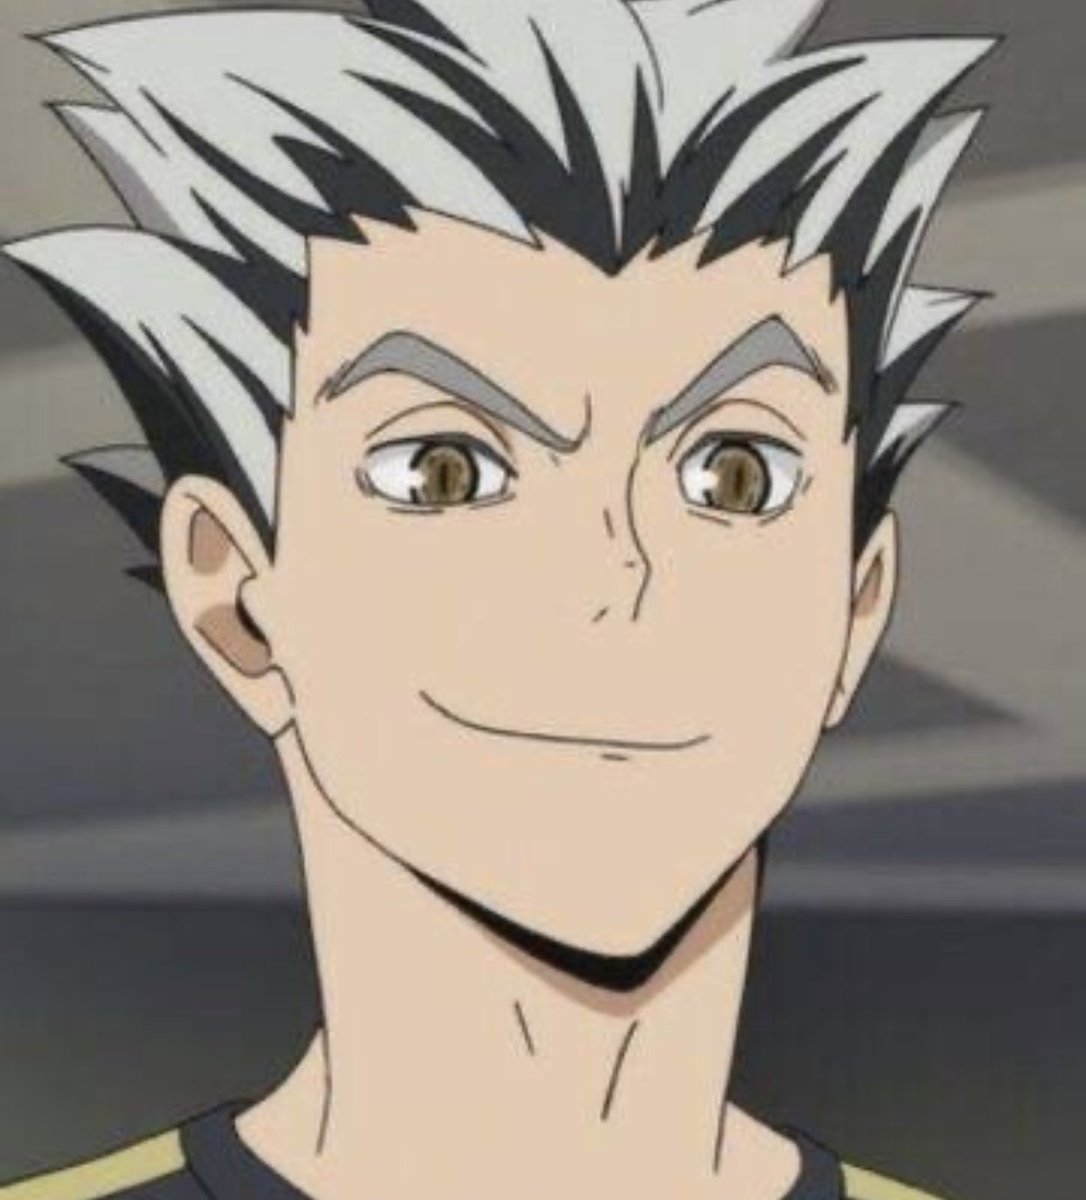 Bokuto as Spike- in hs akaashi looks after bokuto like twilight does spike (plans for all of bokuto’s weaknesses and how to remedy them)- a child’s personality in a adult body- tease their friends to show how much they care- become strong and independent!!